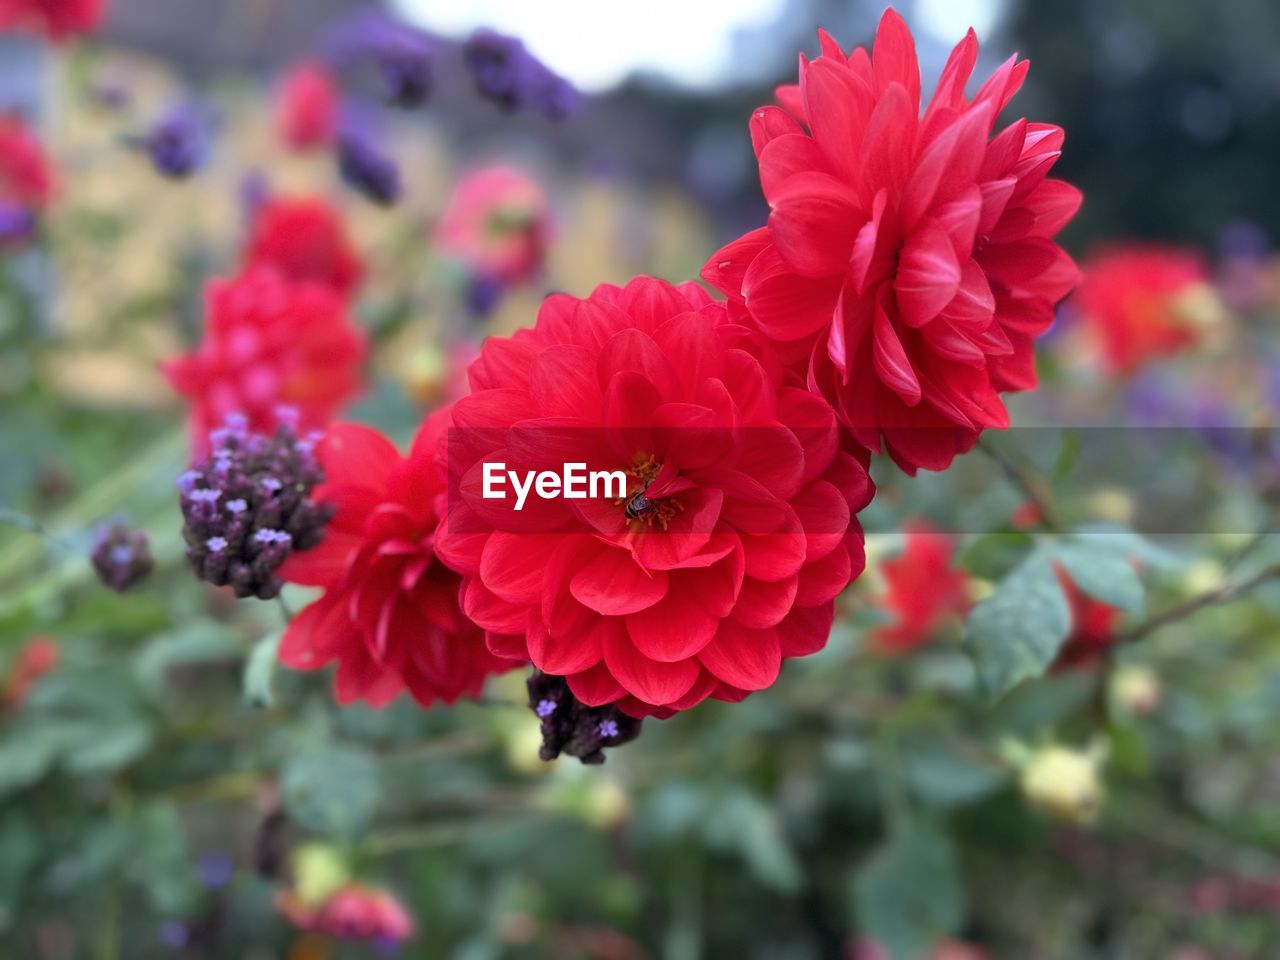 flower, flowering plant, plant, freshness, beauty in nature, red, close-up, nature, petal, flower head, fragility, inflorescence, focus on foreground, growth, no people, outdoors, day, pink, plant part, multi colored